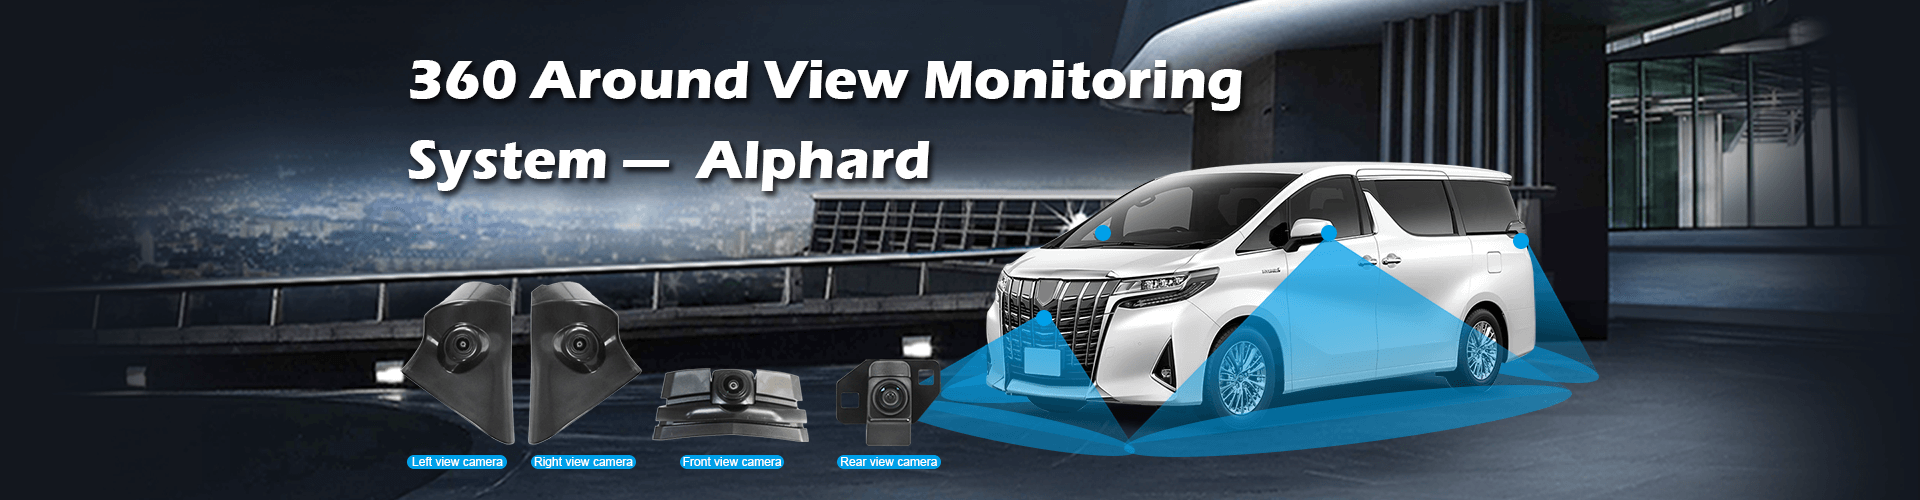 360 around view monitoring system for specific vehicle Alphard